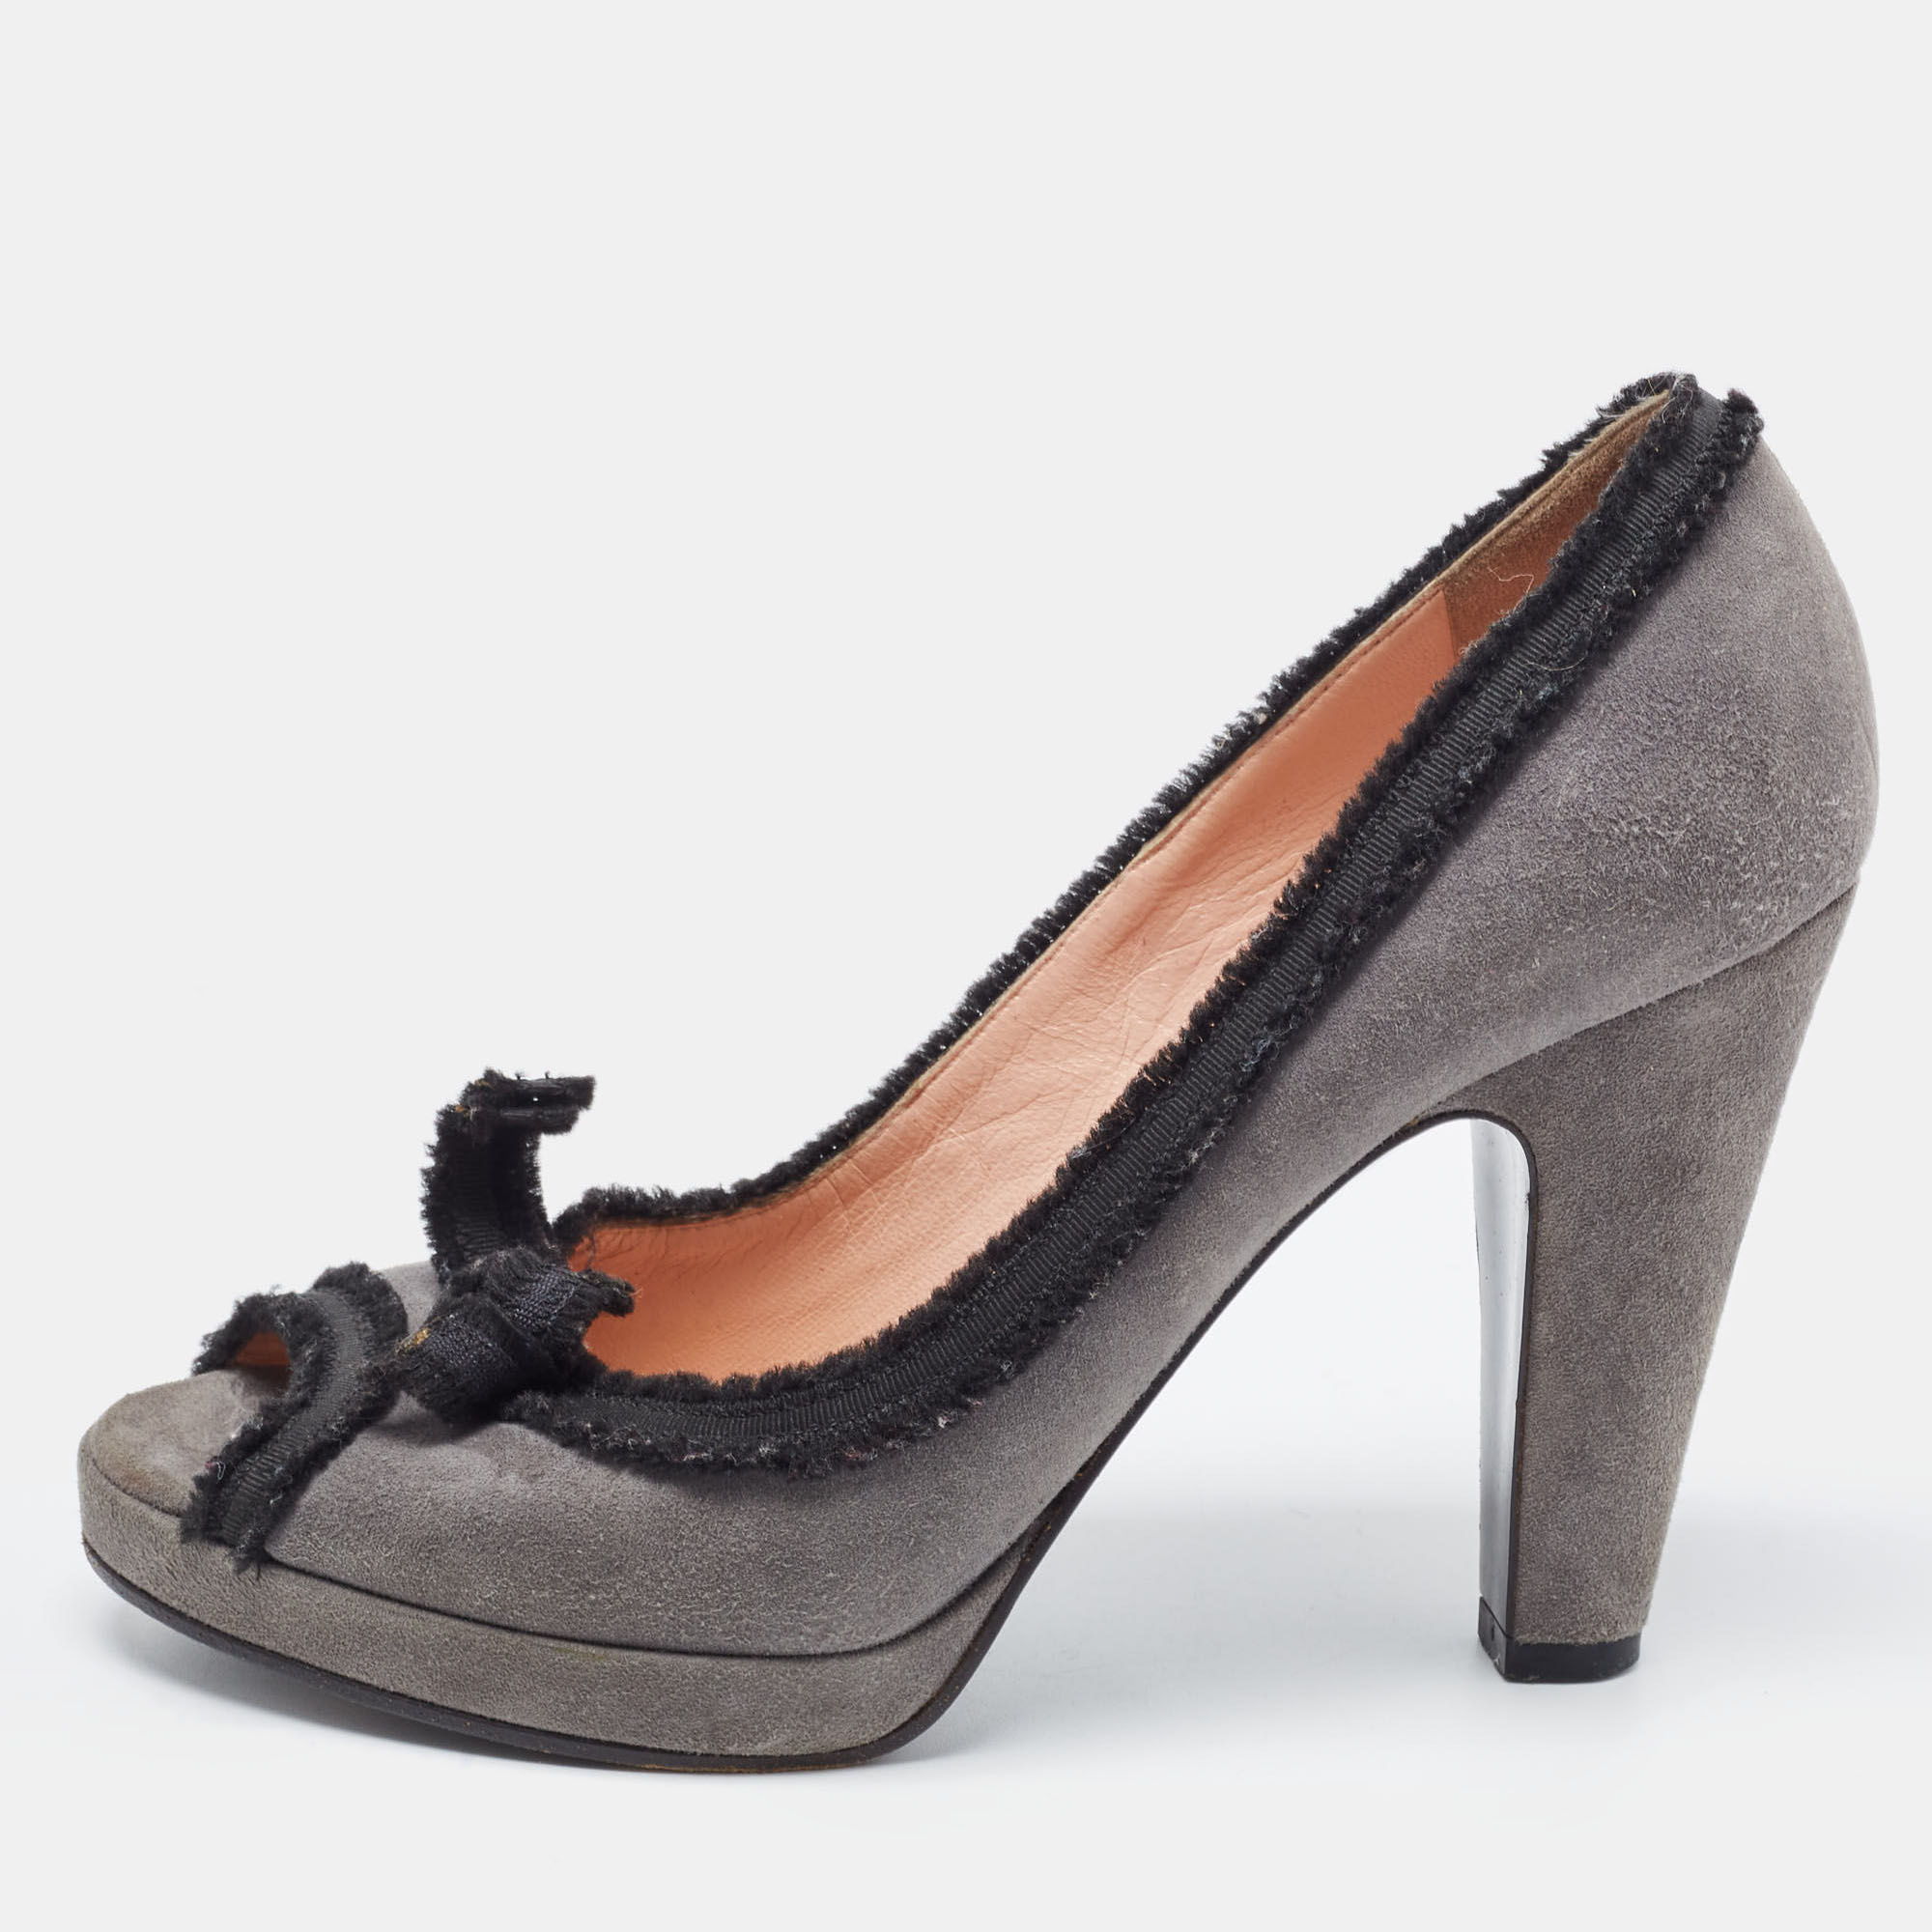 Marc By Marc Jacobs Grey Suede Bow Peep Toe Pumps Size 37